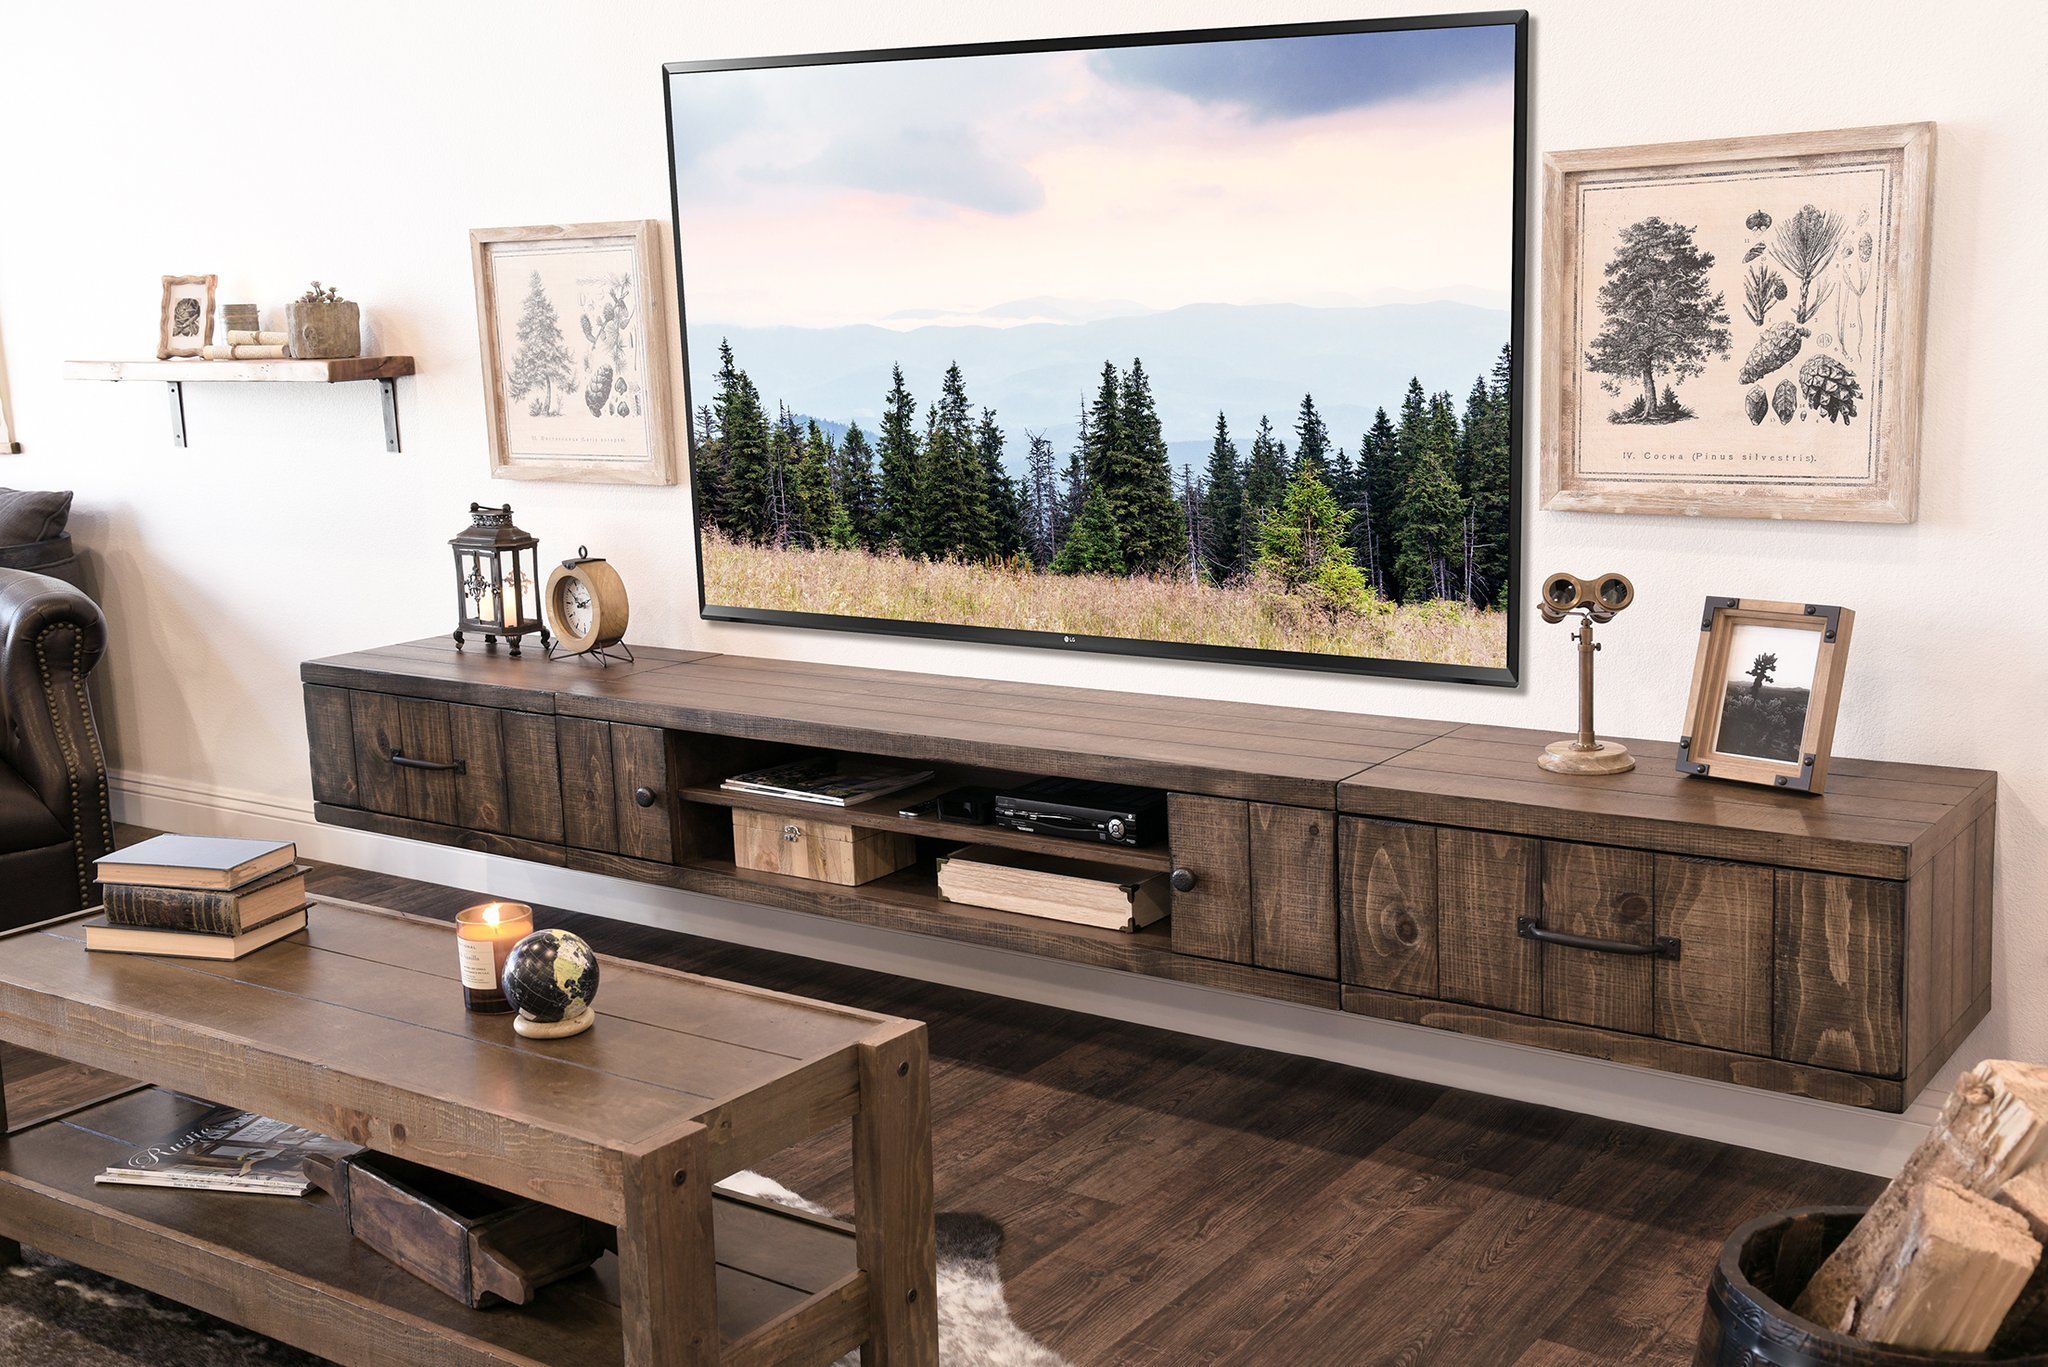 Farmhouse Rustic Wood Floating Tv Stand Entertainment Center – Spice Intended For Modern Farmhouse Rustic Tv Stands (View 7 of 20)